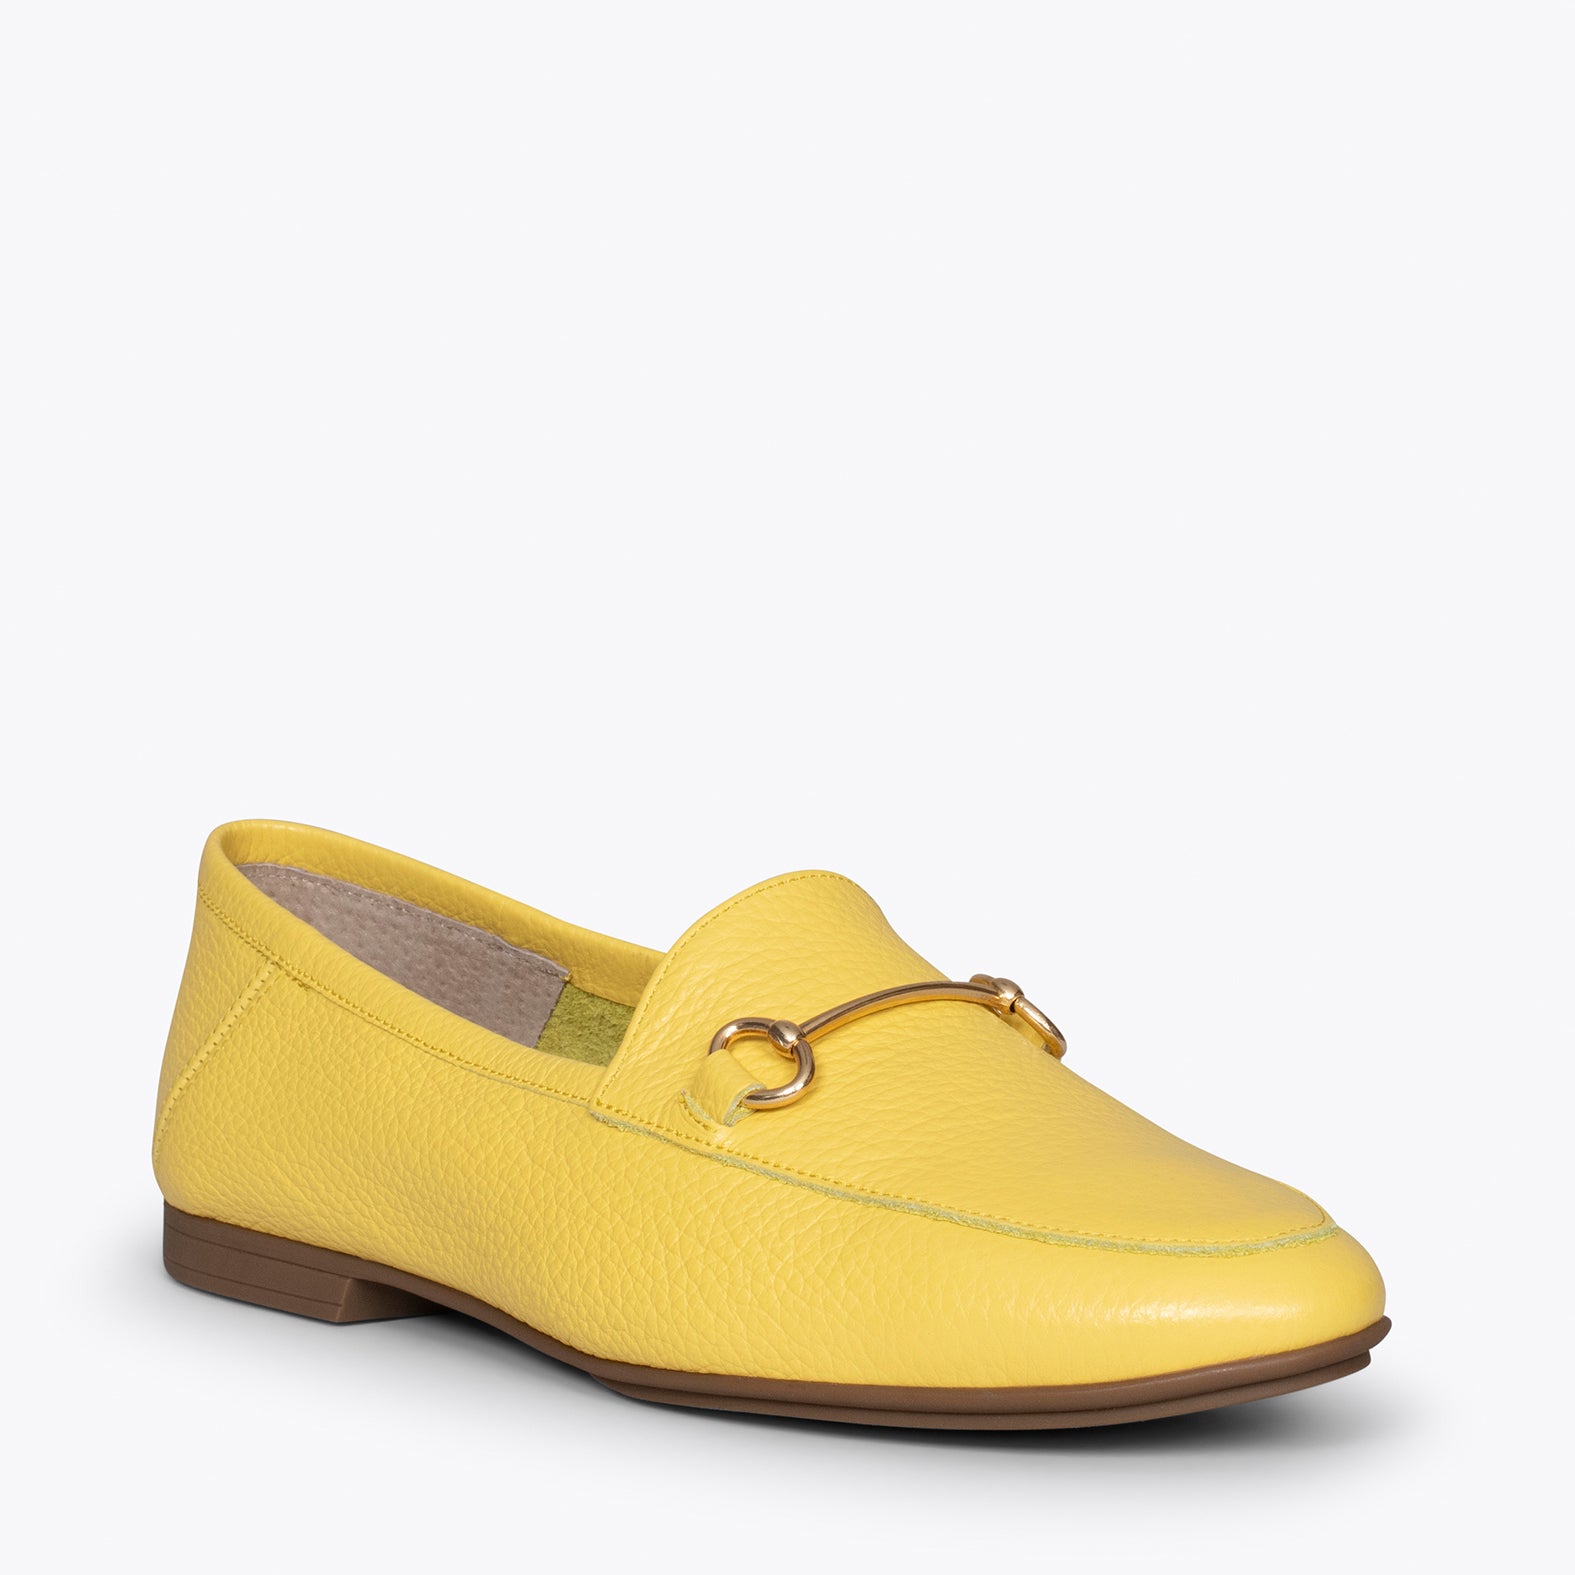 STYLE – YELLOW moccasins with horsebit